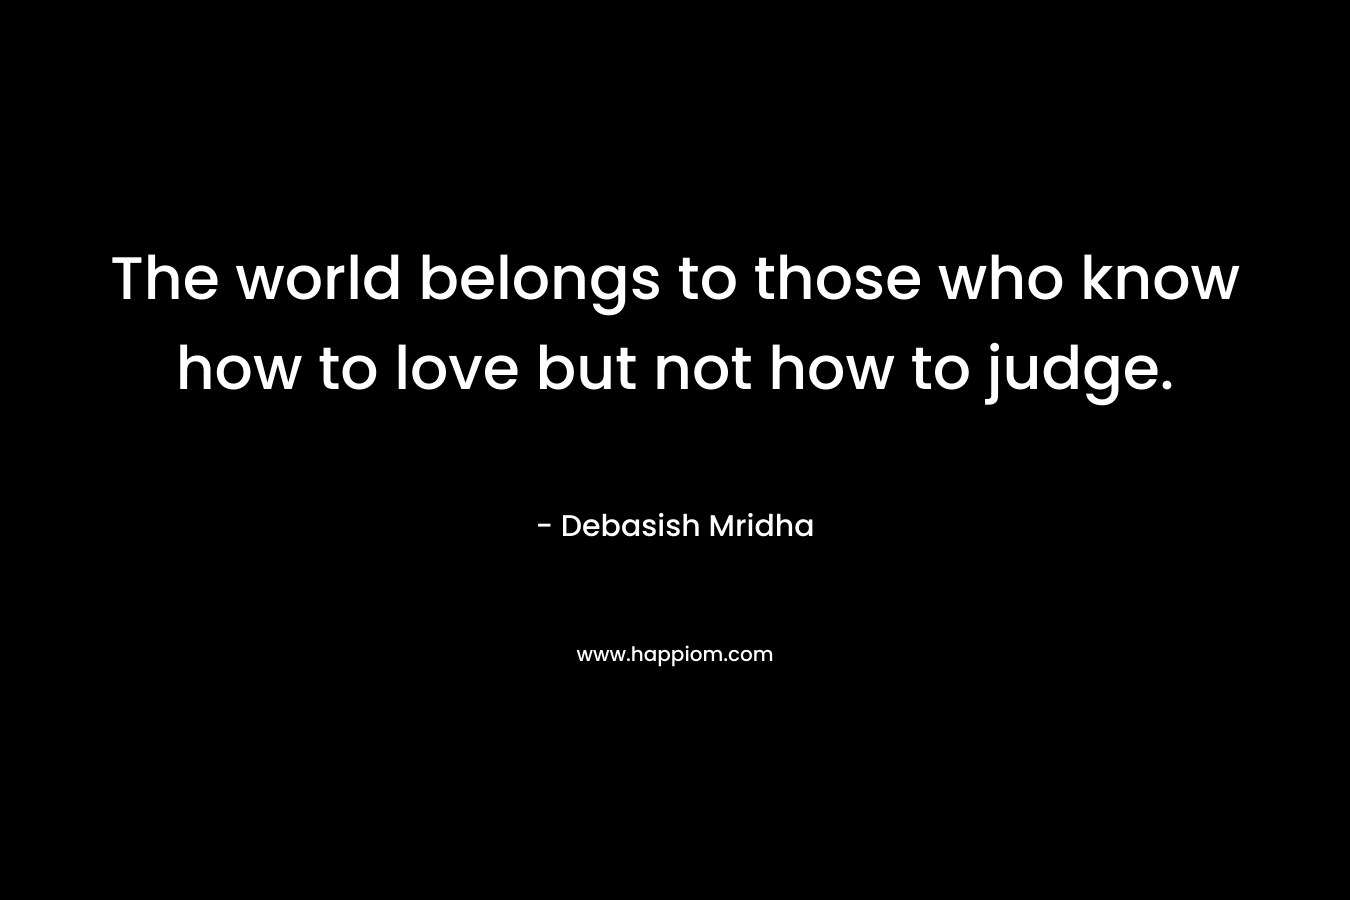 The world belongs to those who know how to love but not how to judge.